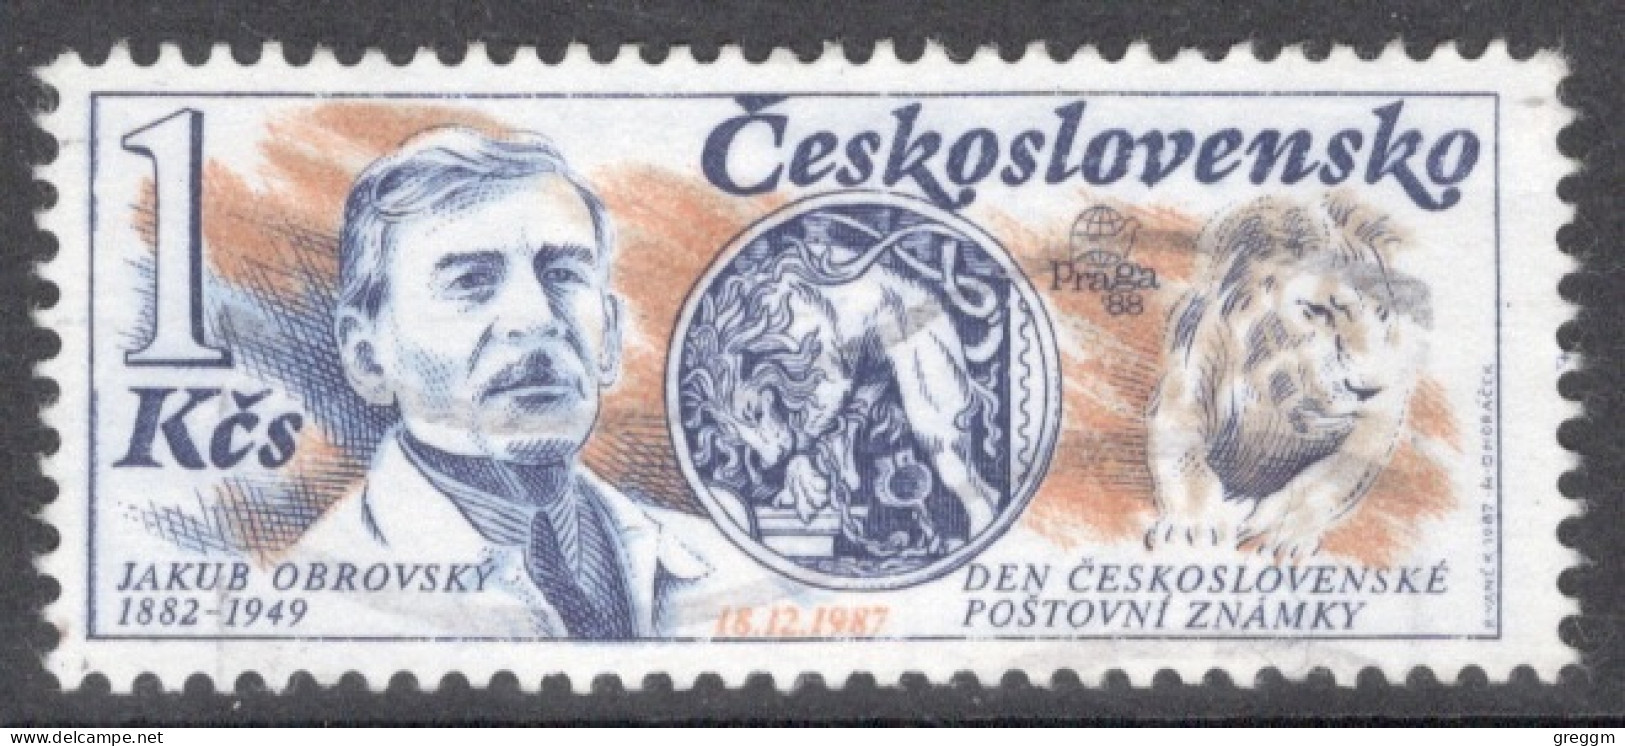 Czechoslovakia 1987 Single Stamp For The 105th Anniversary Of The Birth Of Jakub Obrovsky ,Stamp Designer In Fine Used - Oblitérés